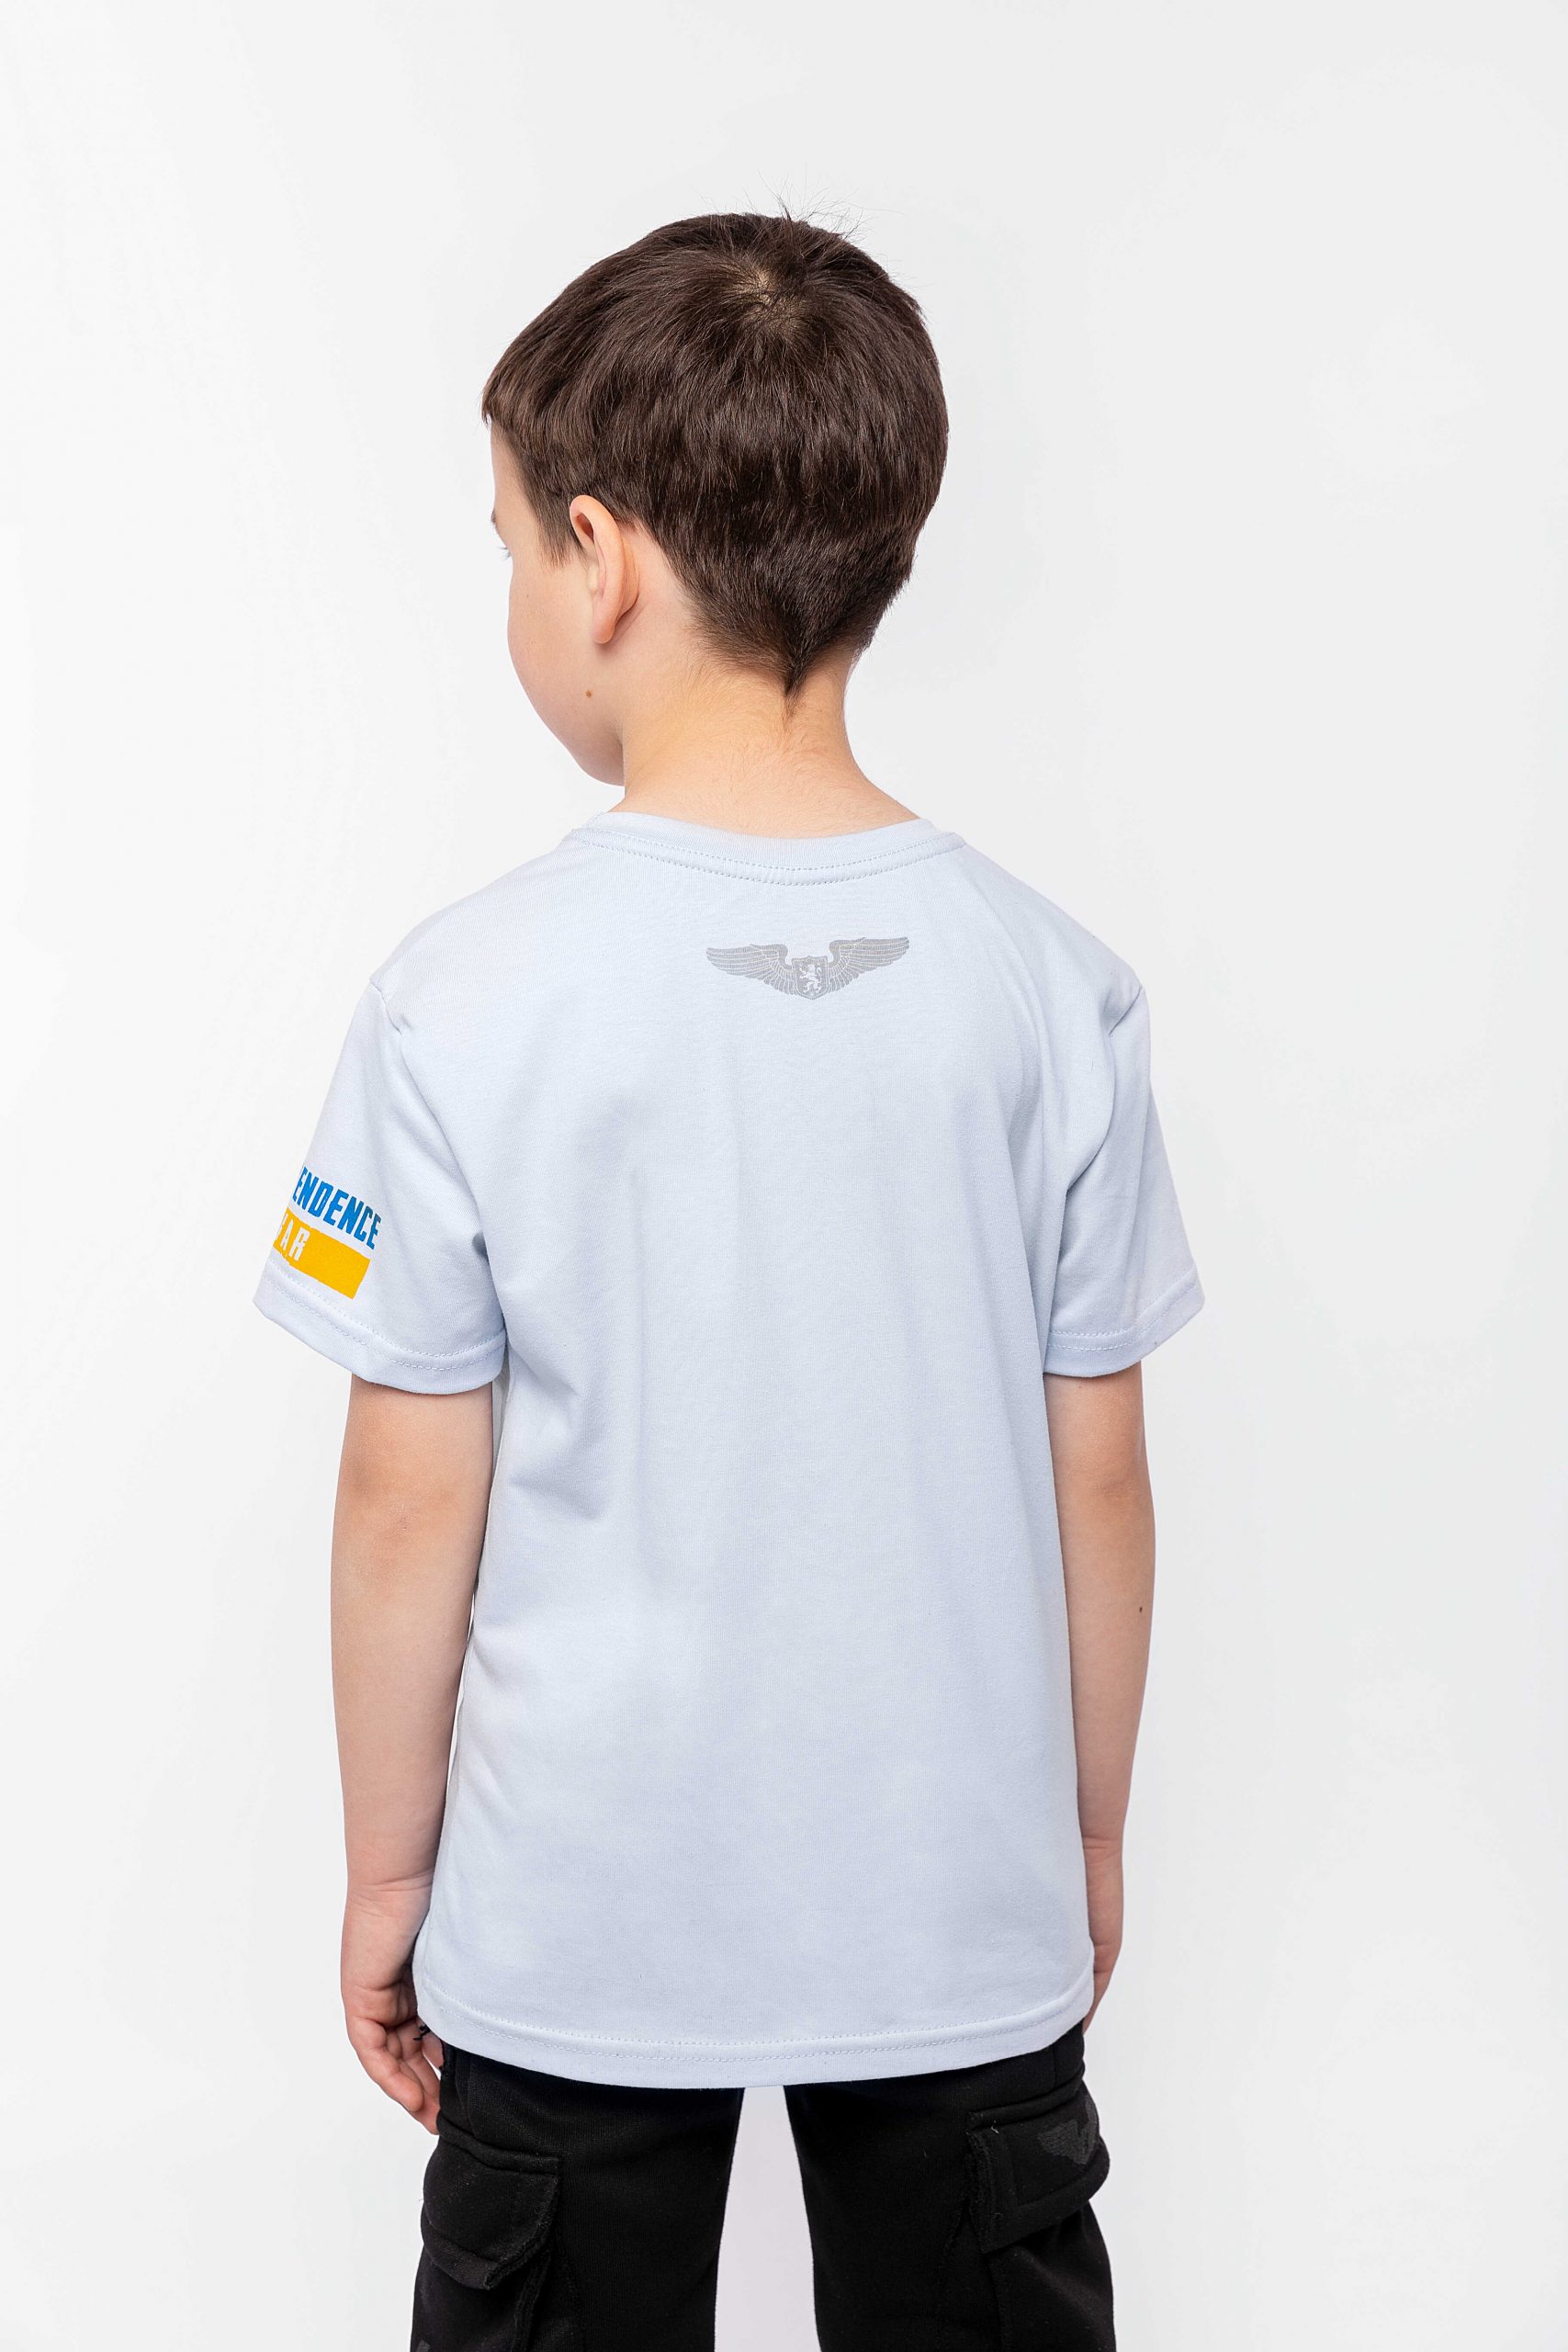 Kids T-Shirt We Are From Ukraine.a. Color light blue. 3.